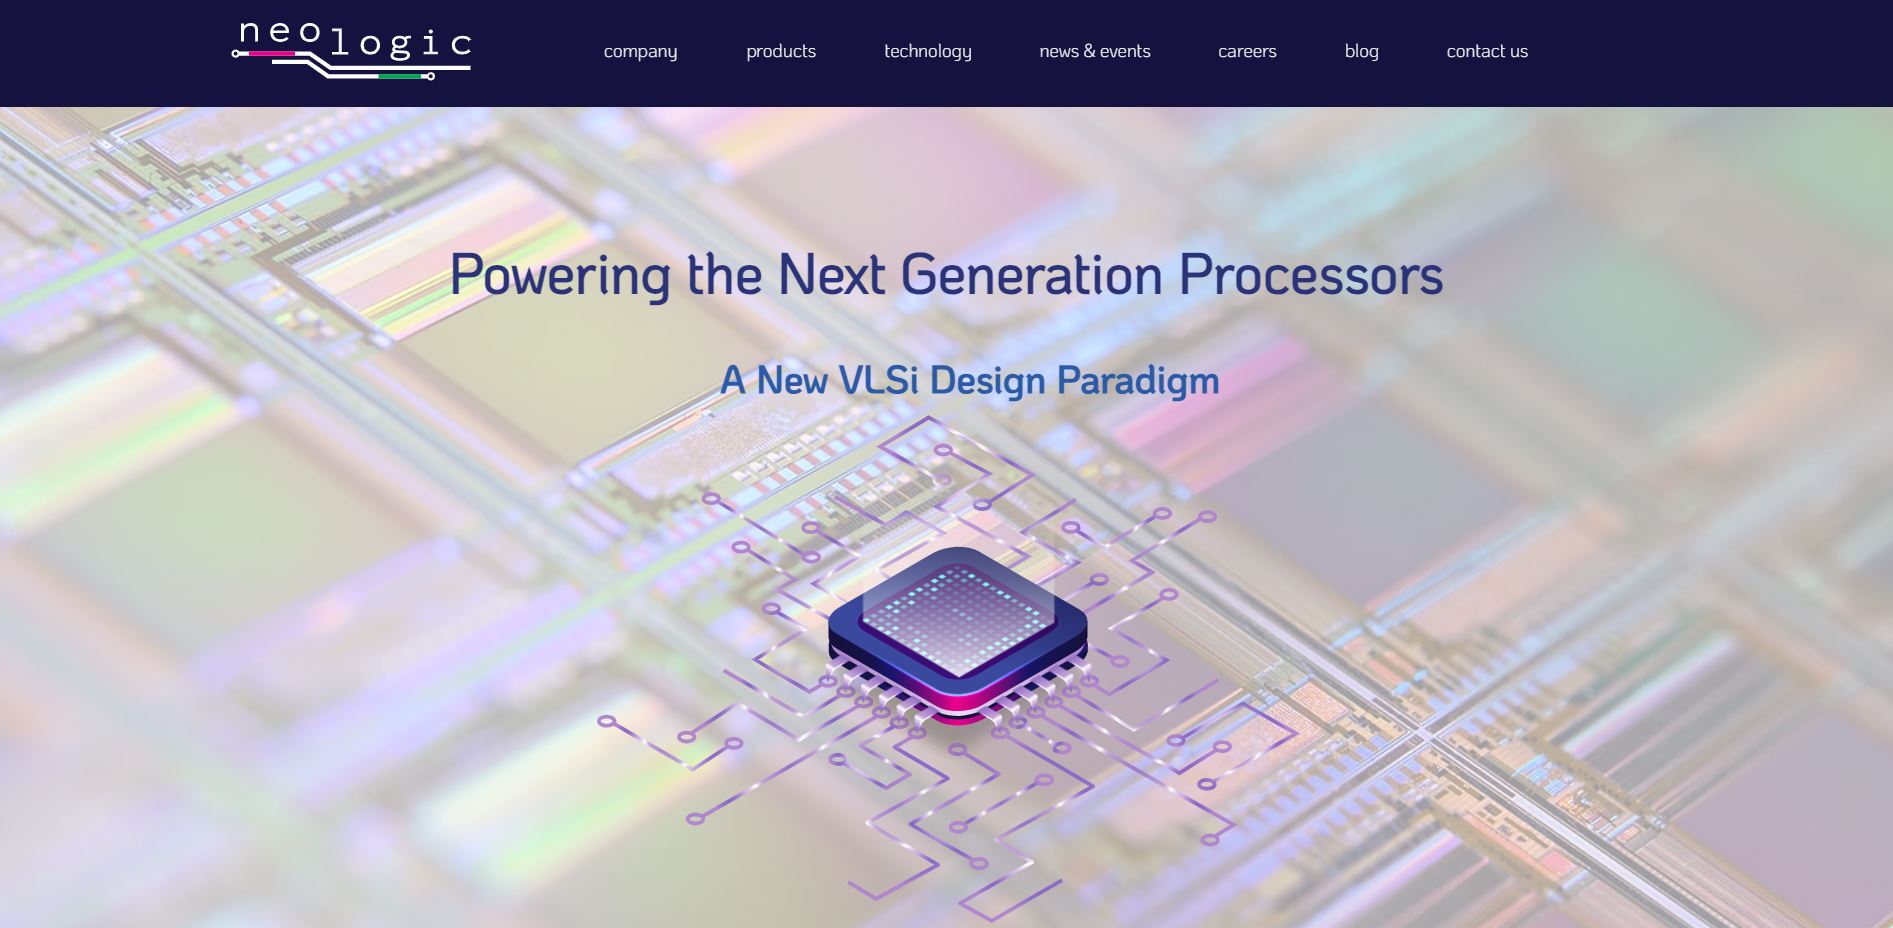 NeoLogic: Israeli semiconductor startup, backed by $8M seed funding